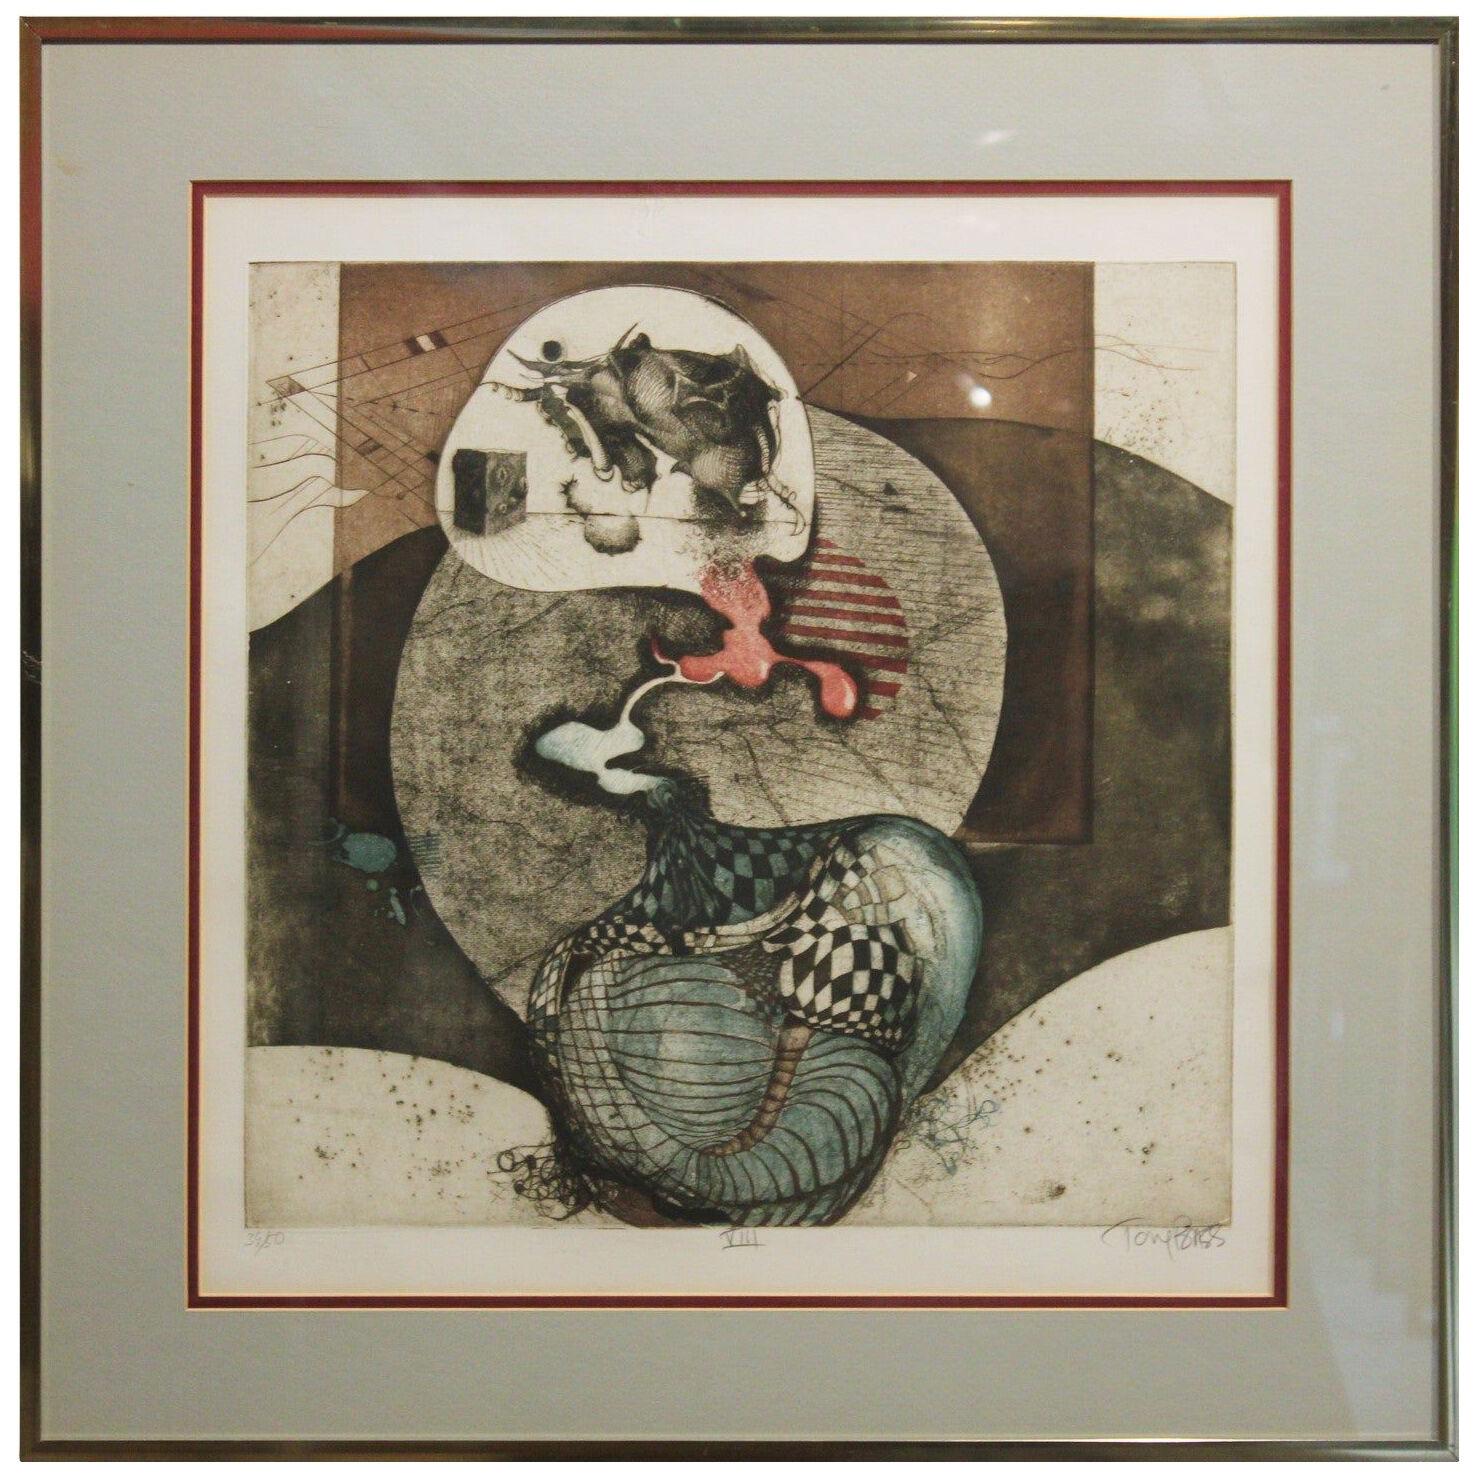 "VIII" Abstract Surrealist Lithograph, Edition 39 of 50